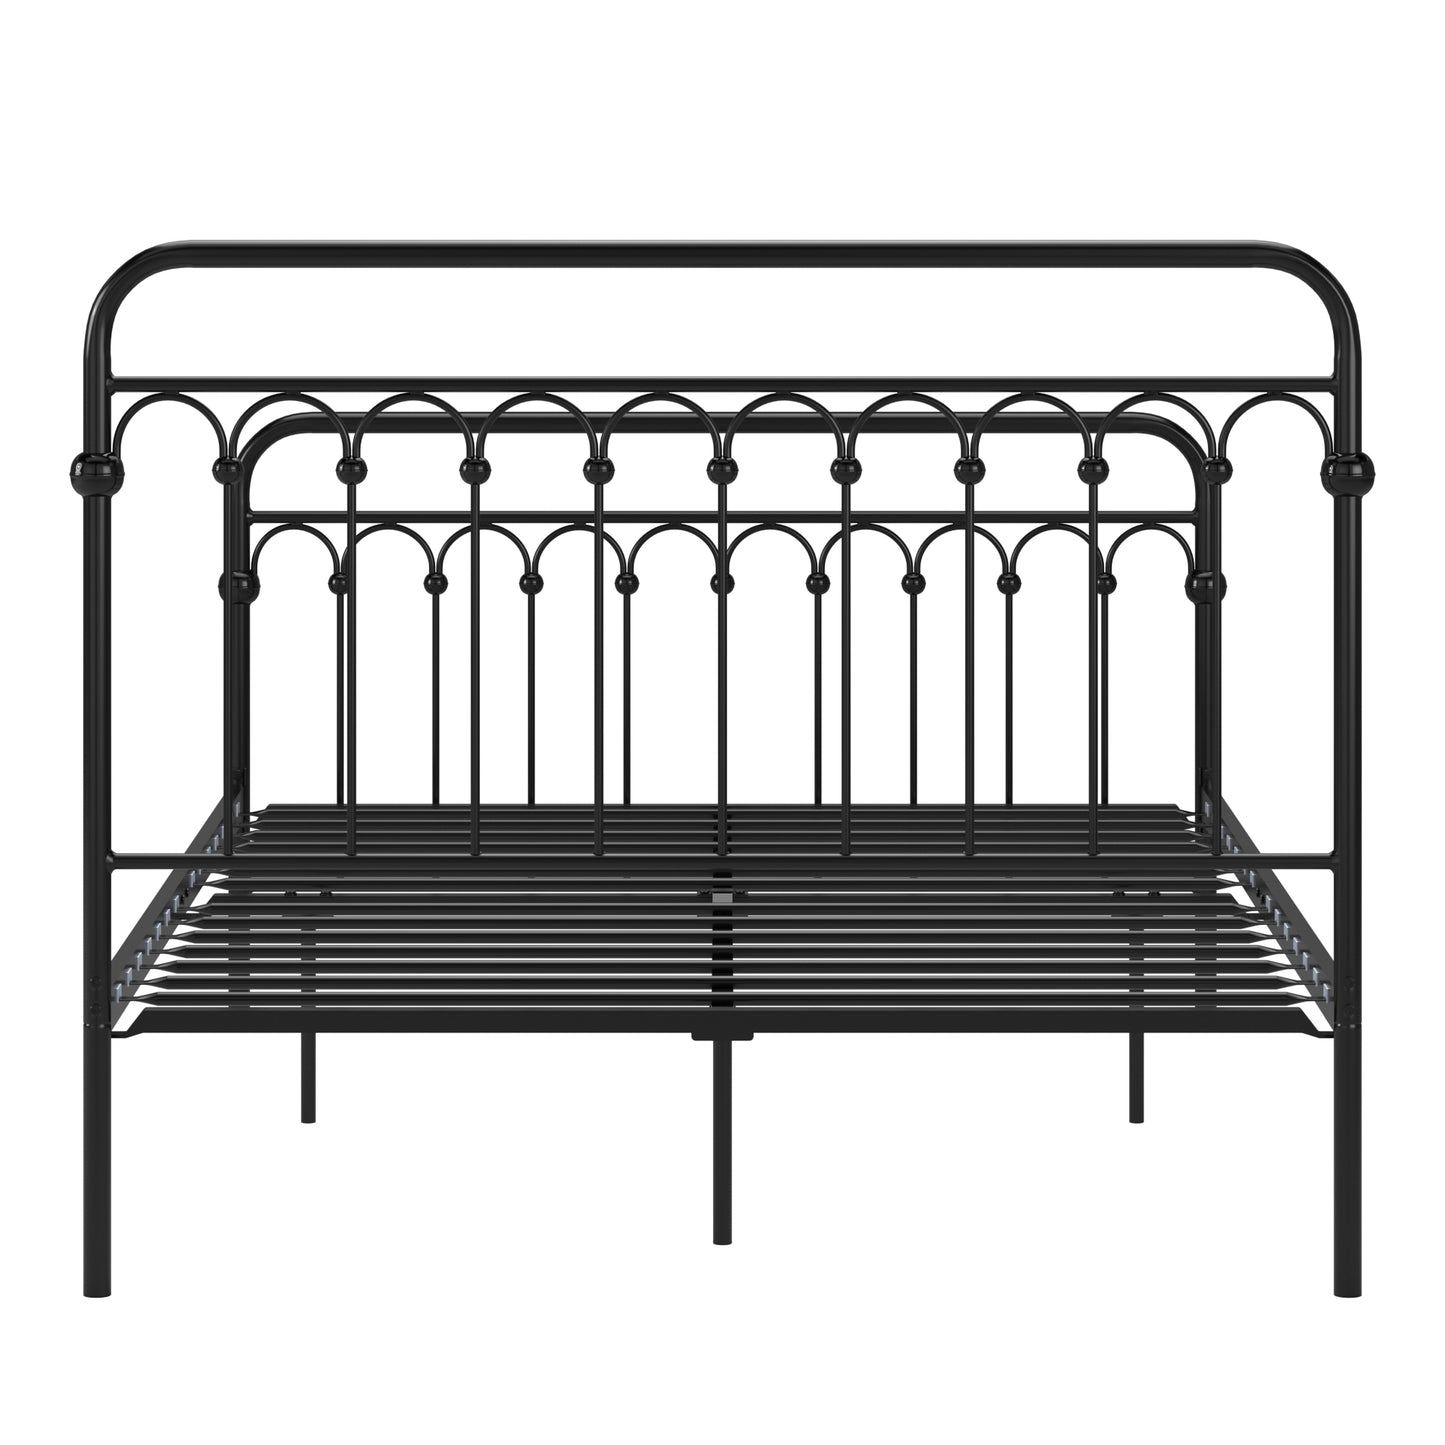 Local Pickup Only - Metal Arches Platform Bed - Black, Full